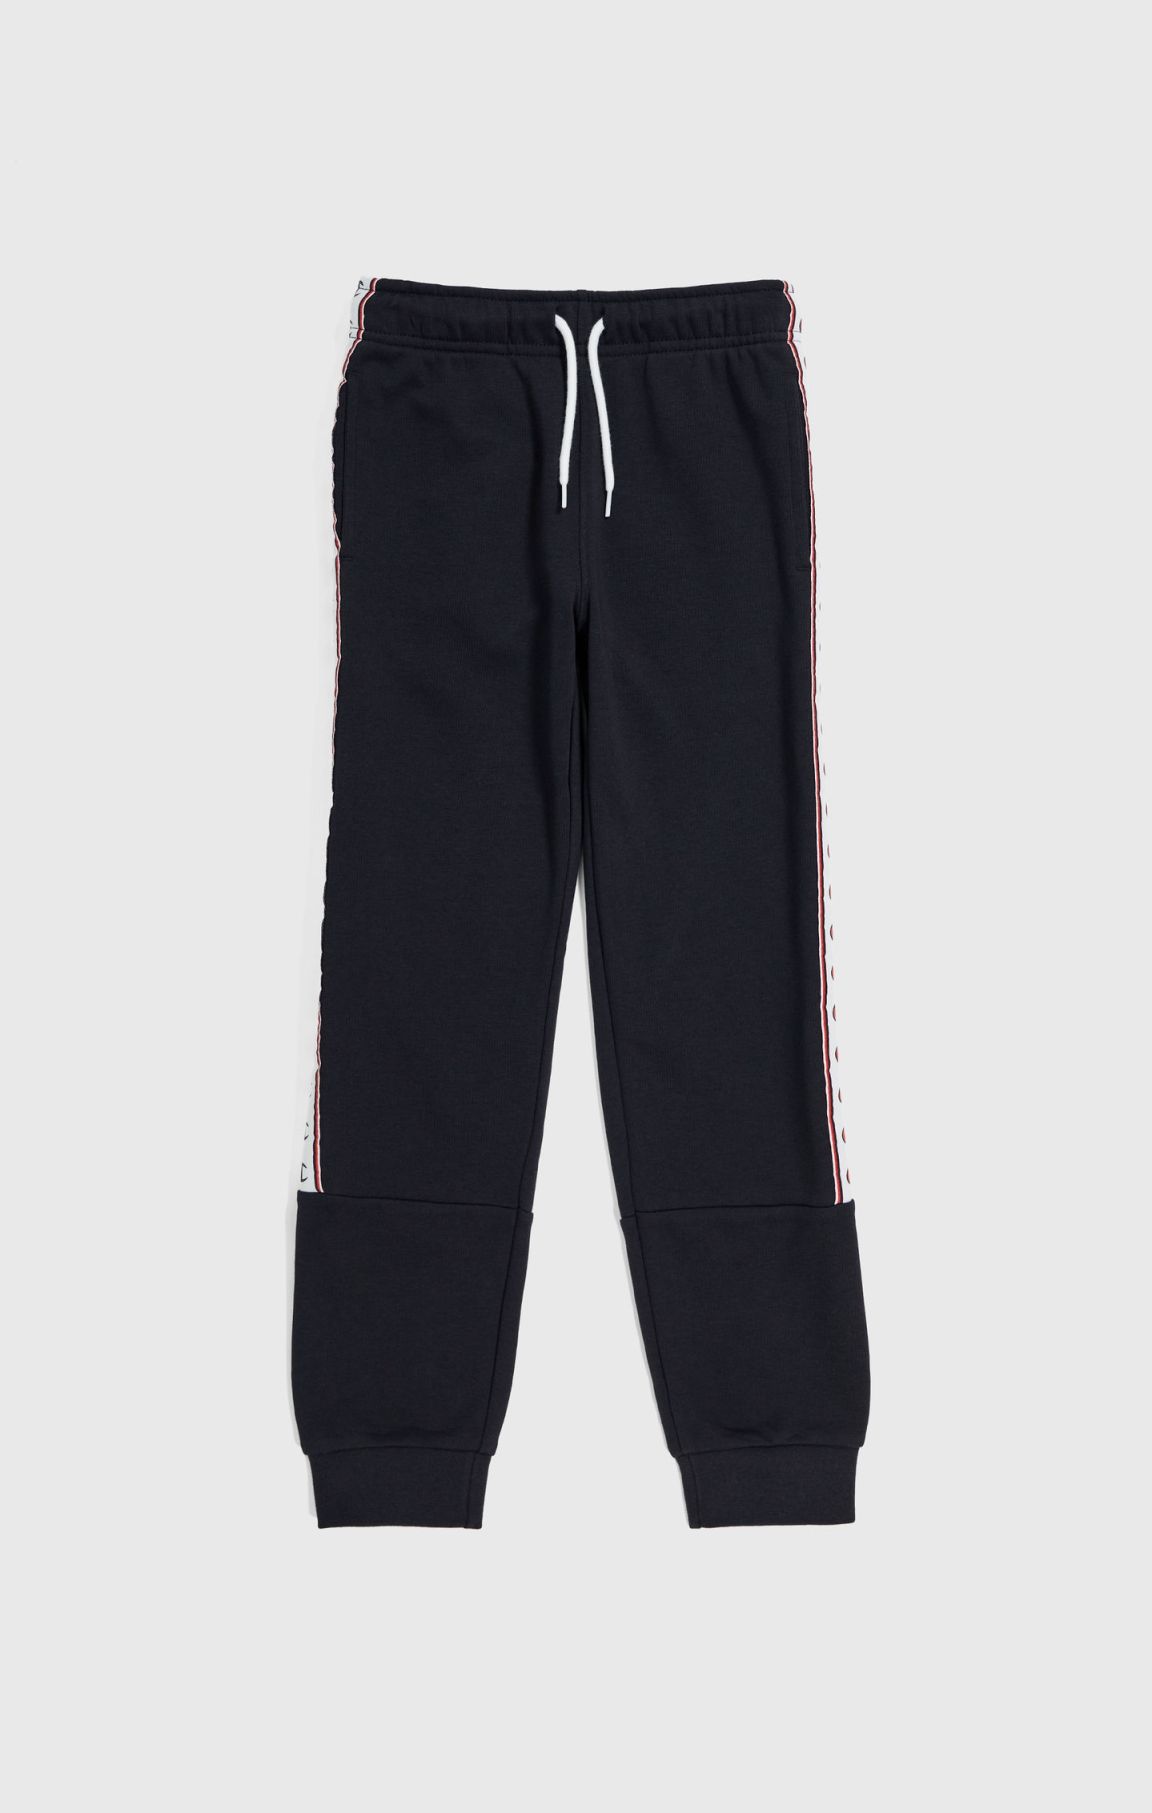 Boys Sporty Light French Terry Joggers